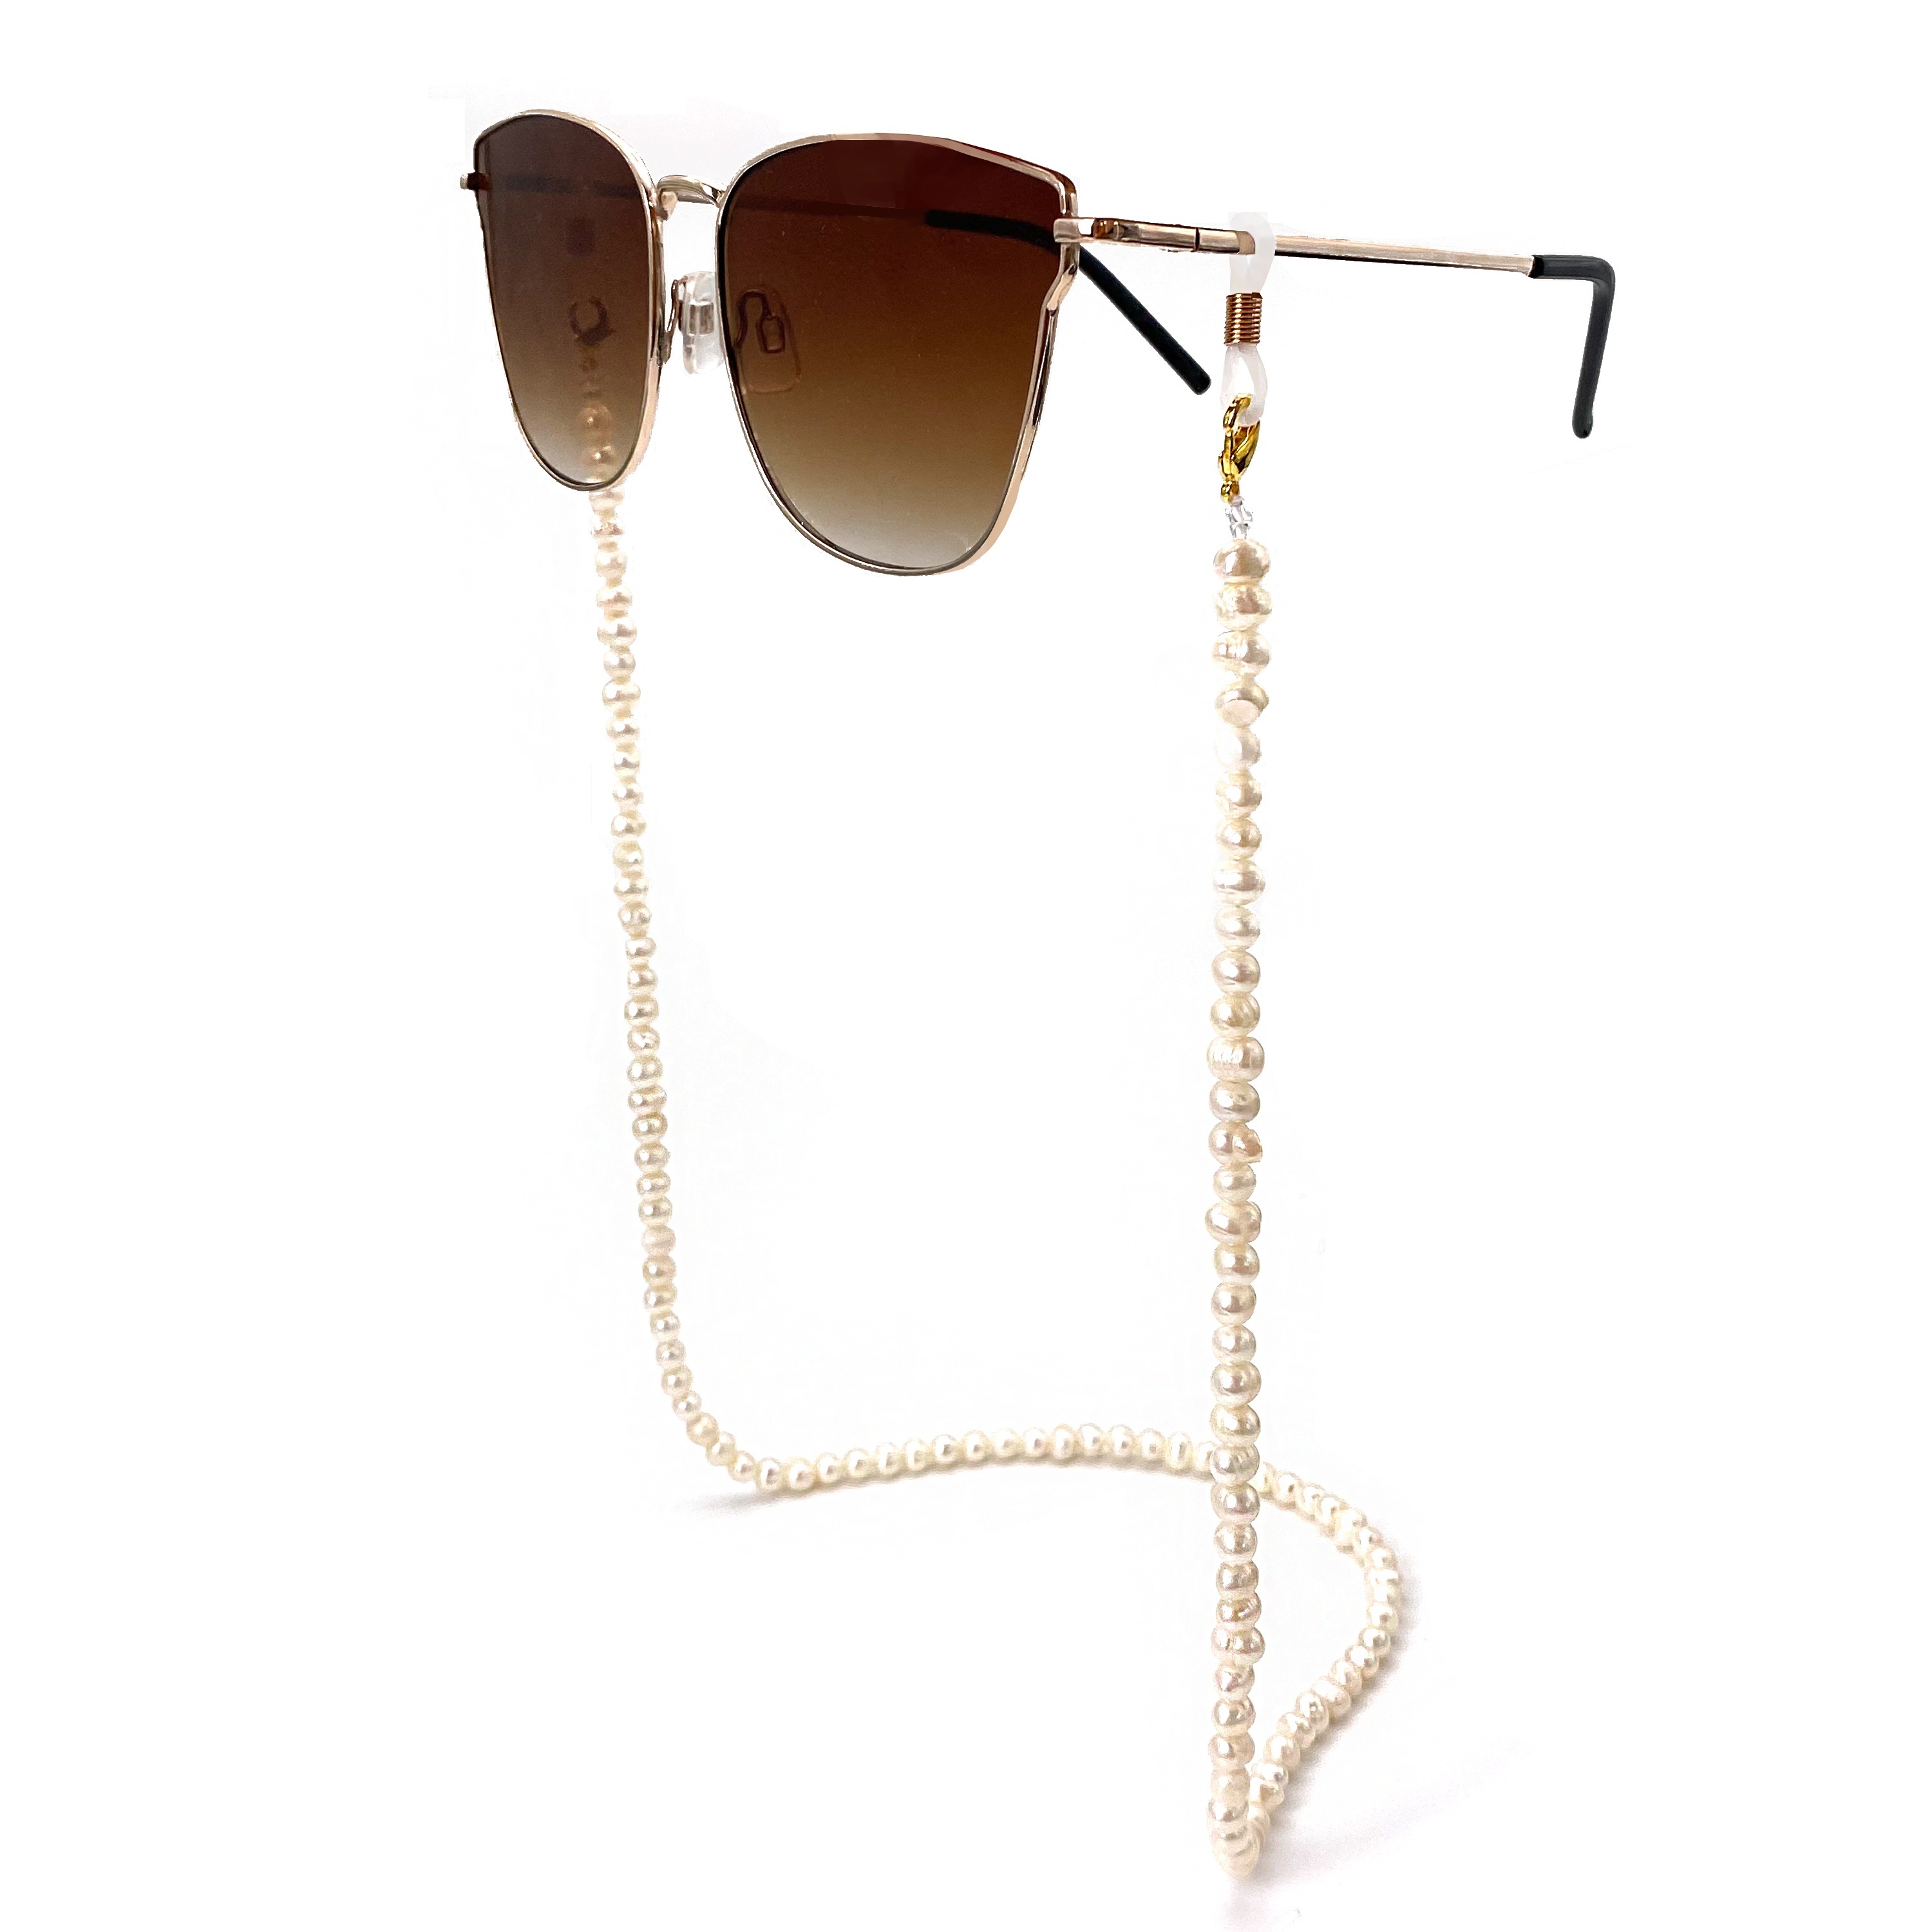 Faux Pearl Glasses Chain, Sunglass Strap in Gold with Pearls